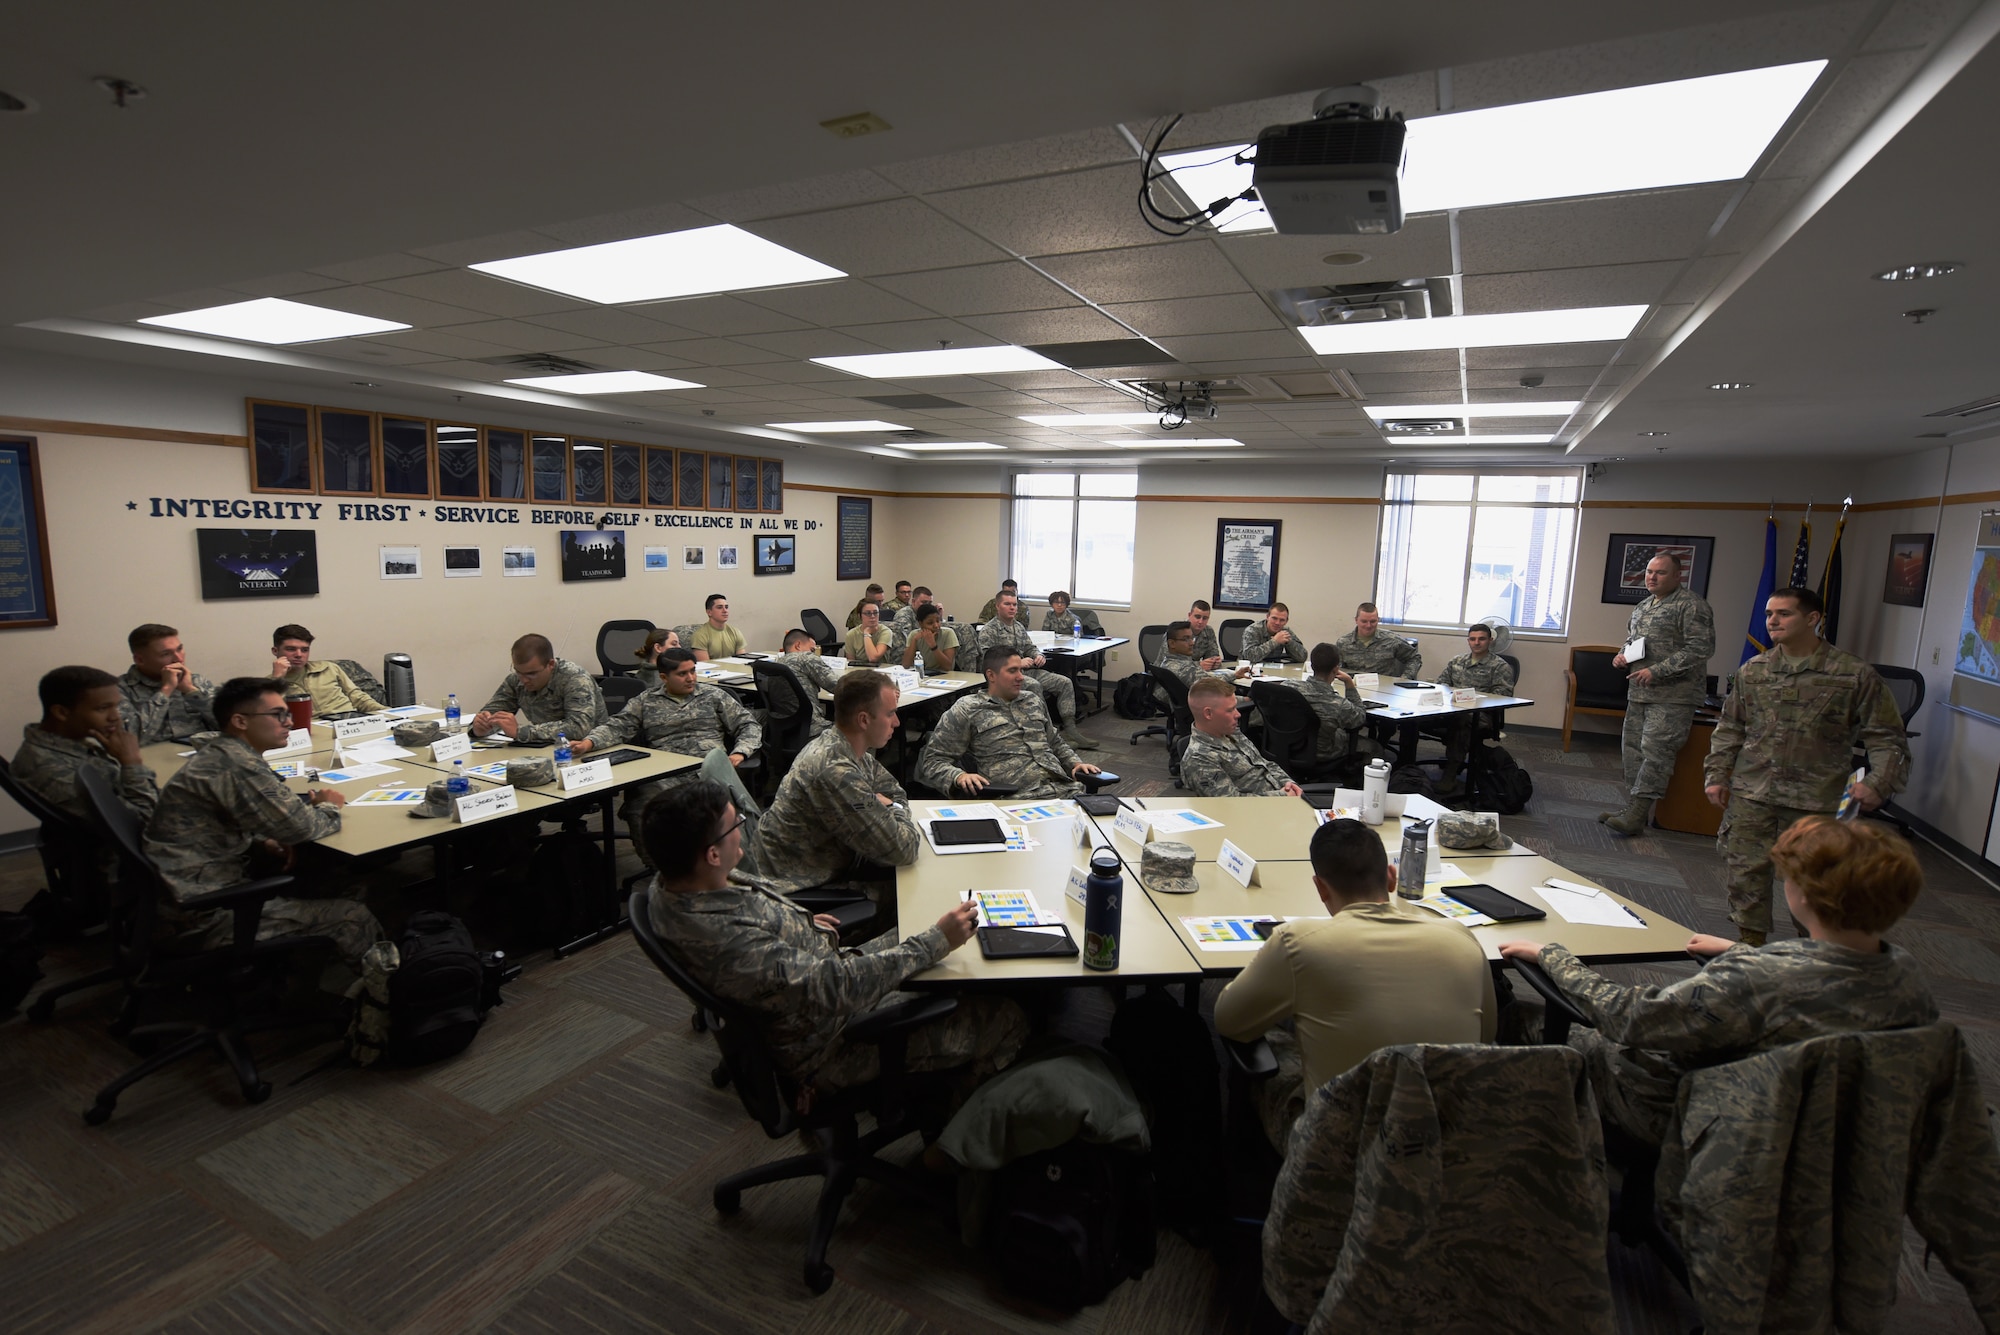 First-term Airmen participate in a group discussion during the First Term Airmen Course at the Rushmore Center on Ellsworth Air Force Base, S.D., Oct. 22, 2018. The FTAC course is a mandatory, weeklong program that is packed with professional development guidance, life-skills briefings and visits from base agencies to aid new Airmen with getting their careers started. (U.S. Air Force photo by Airman 1st Class Christina Bennett)